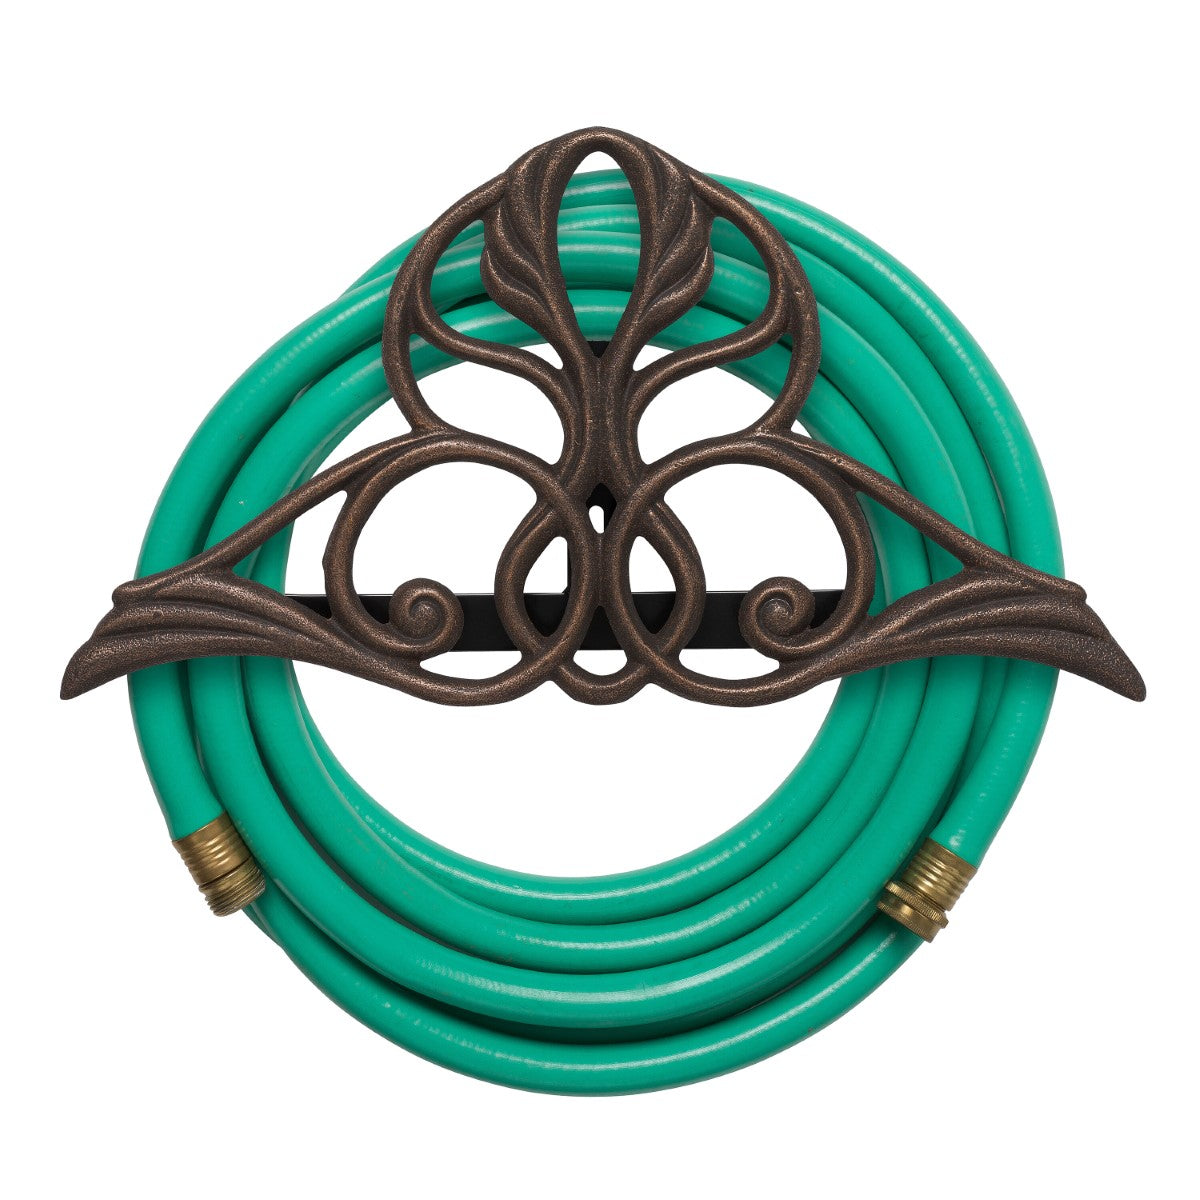 Whitehall Victorian Hose Holder (2 Styles Available)